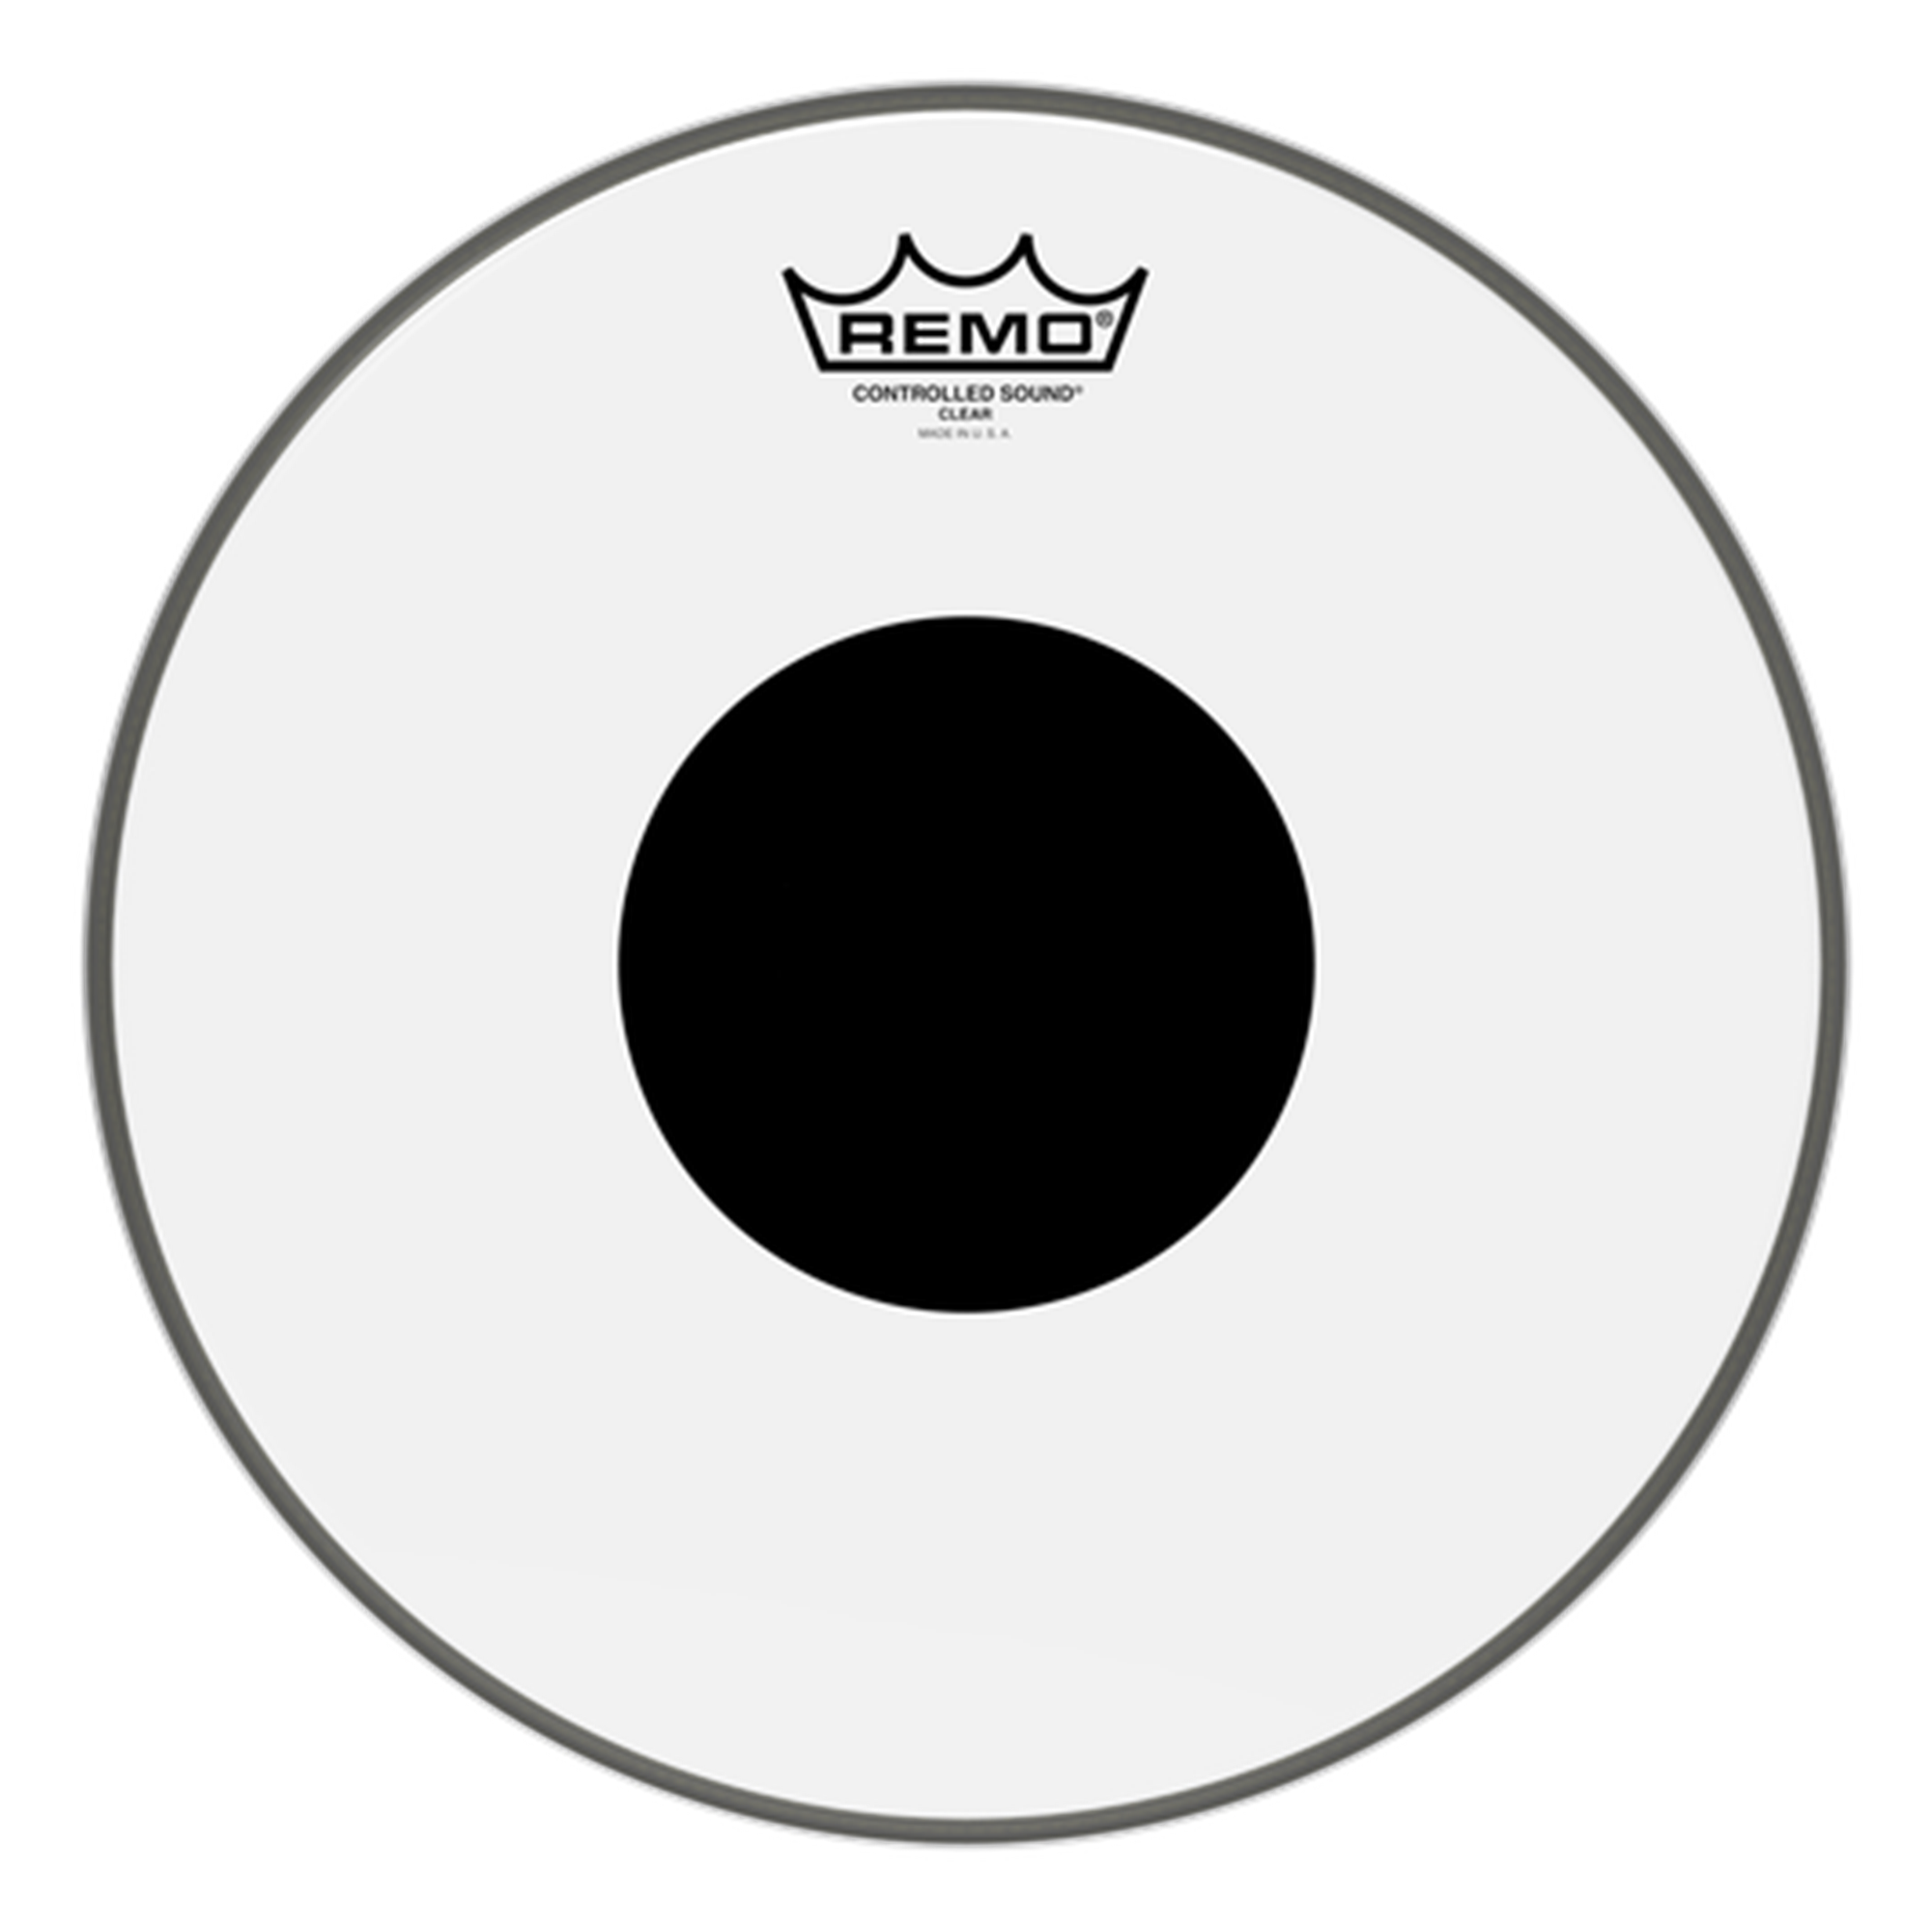 REMO CS031000 10" Controlled Sound Clear Drum Head (Black Dot)